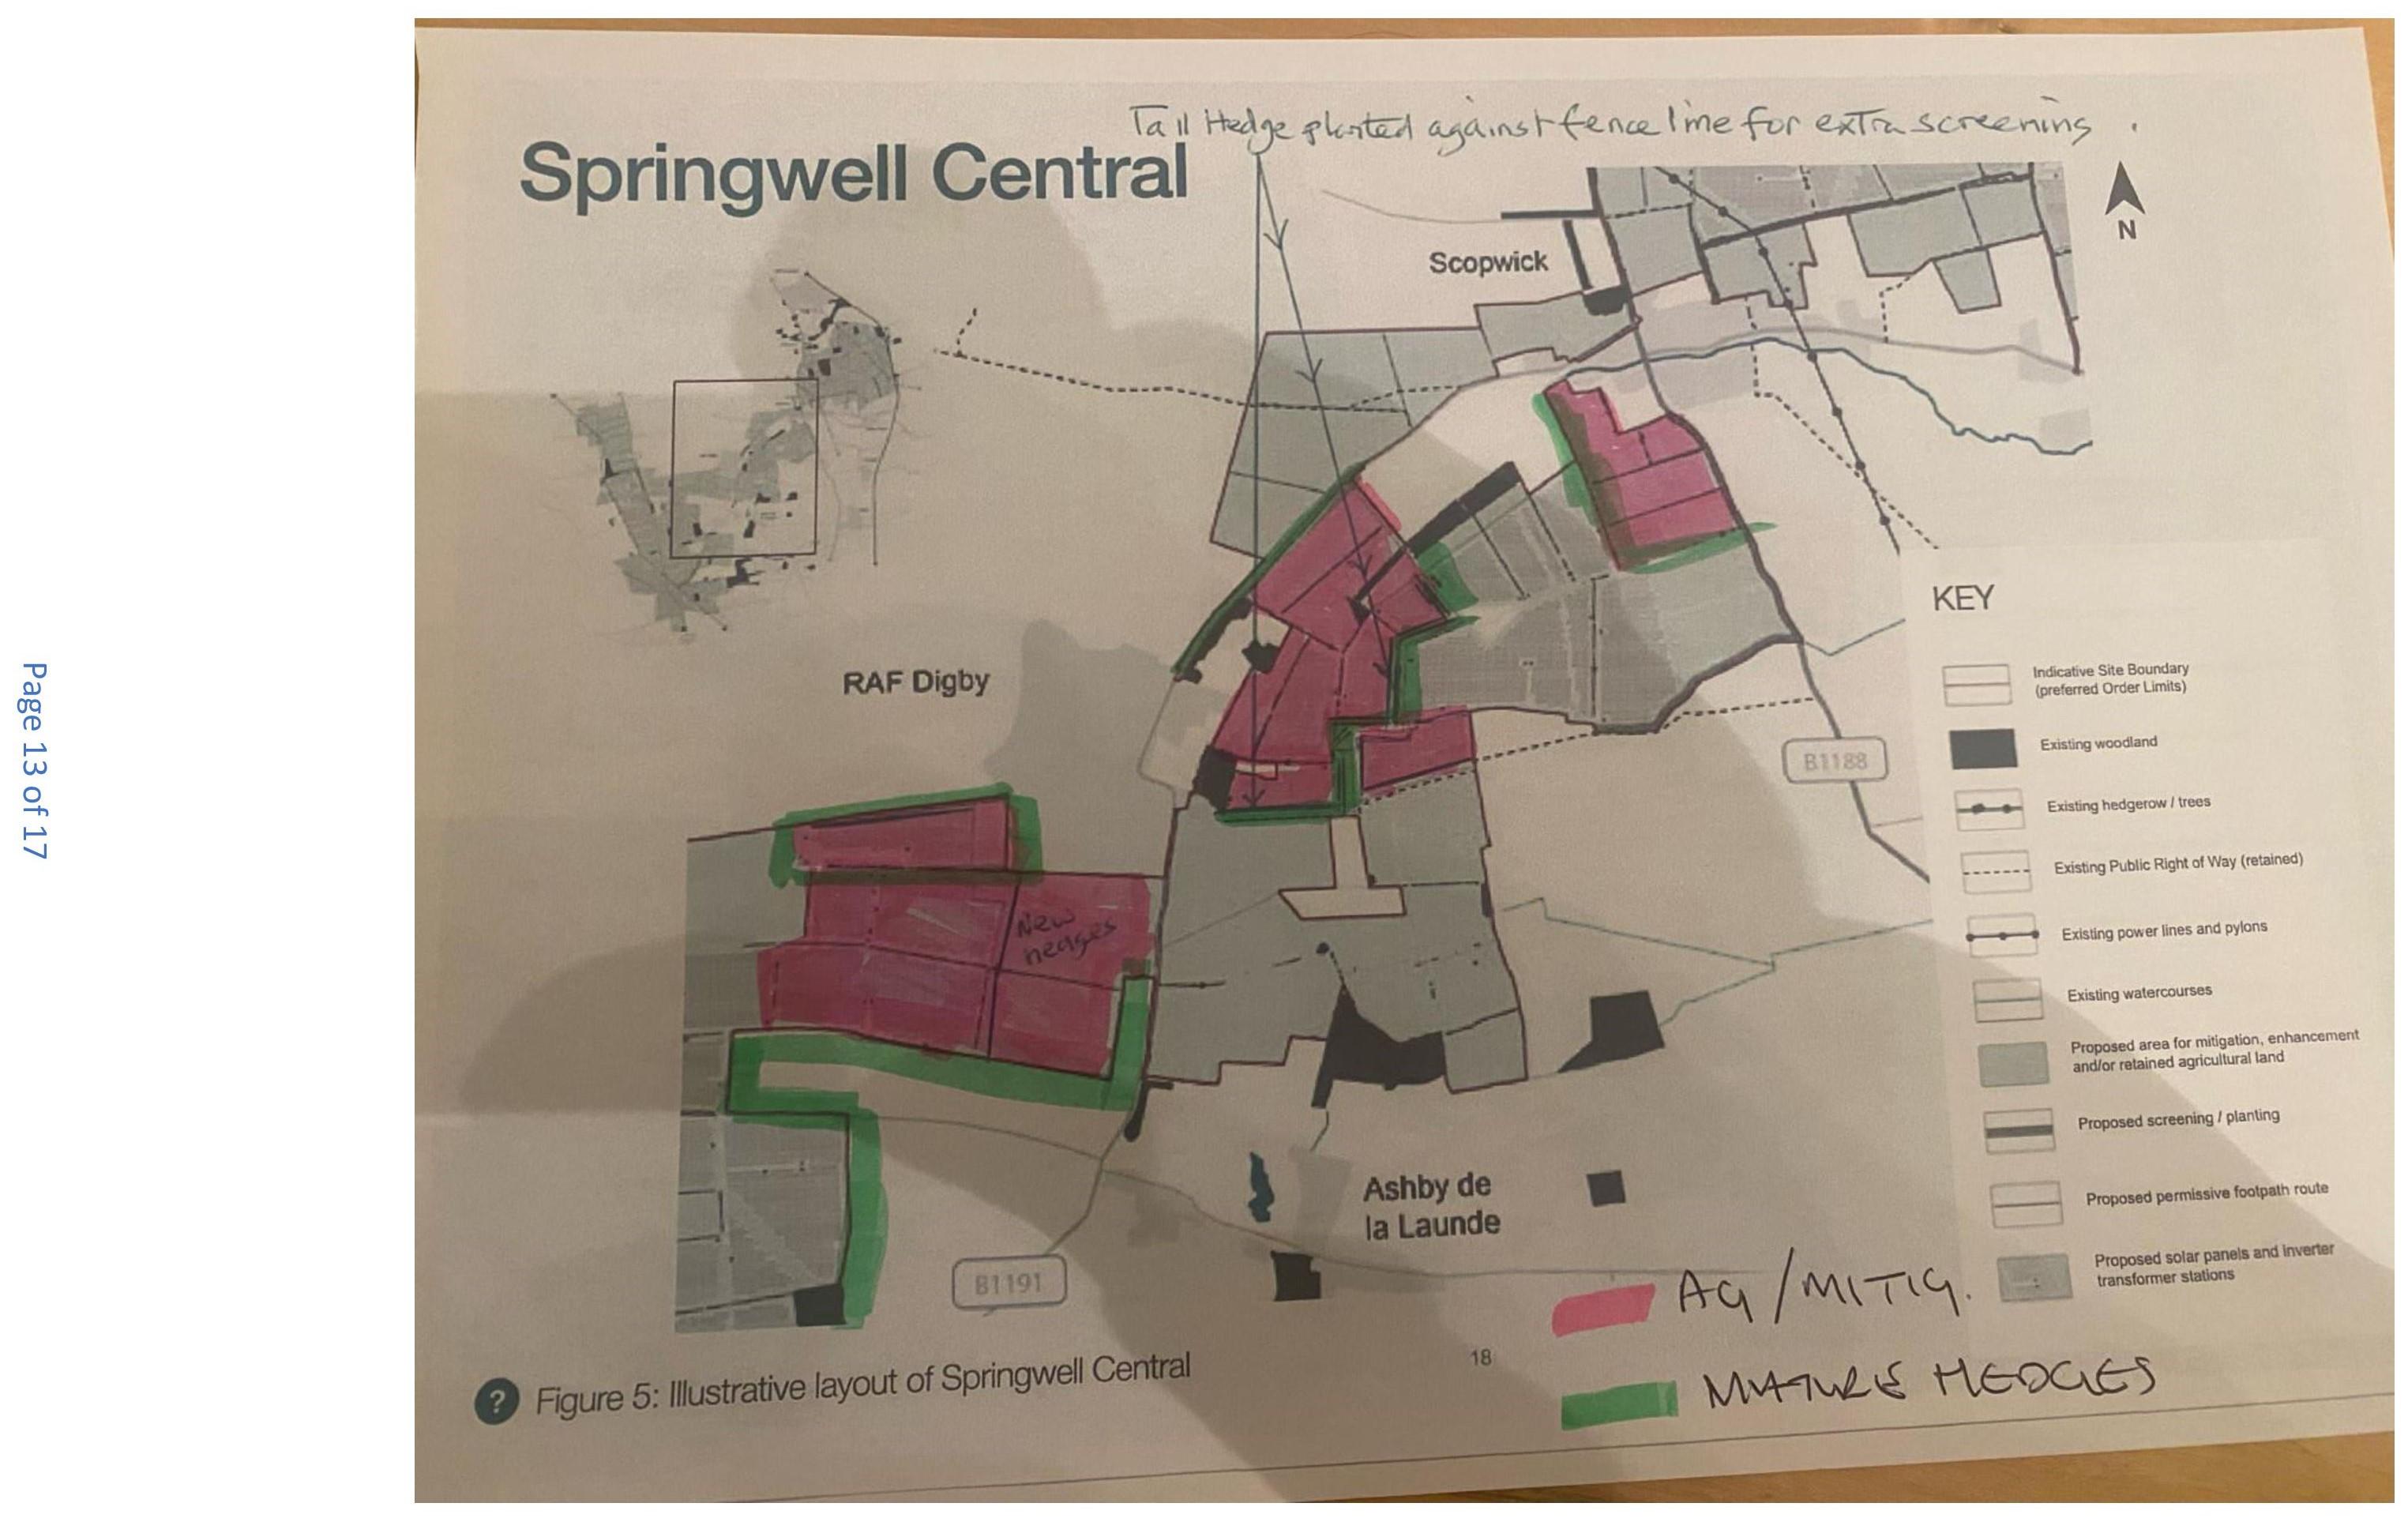 Springwell feb24 images 2